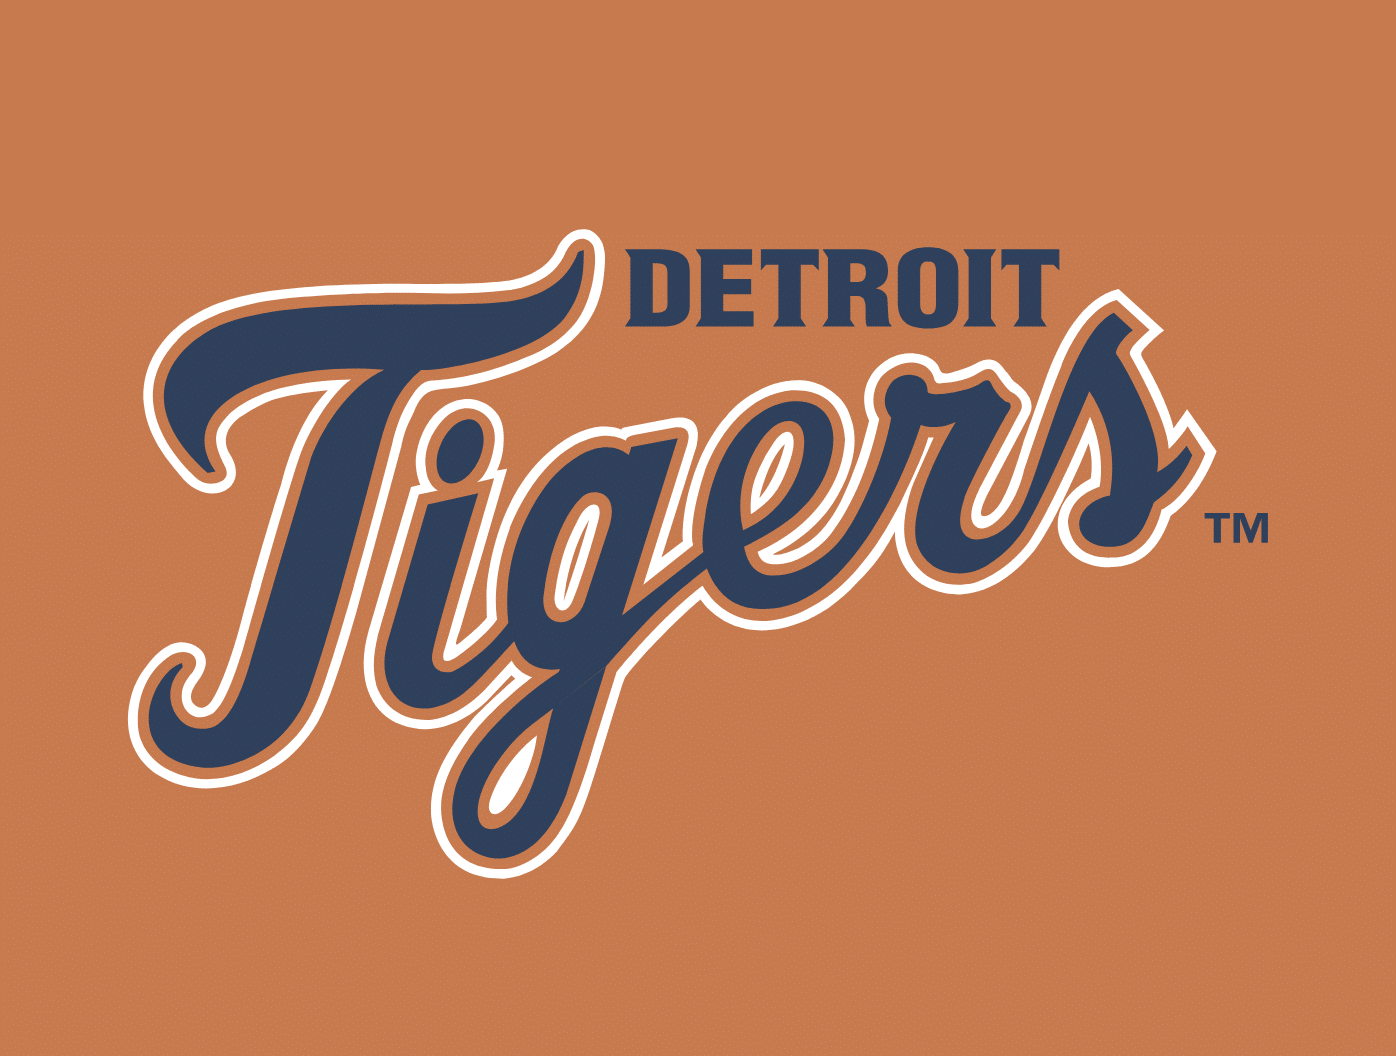 Detroit Tigers announce coaching changes Matthew Boyd and Cisnero to become free agents